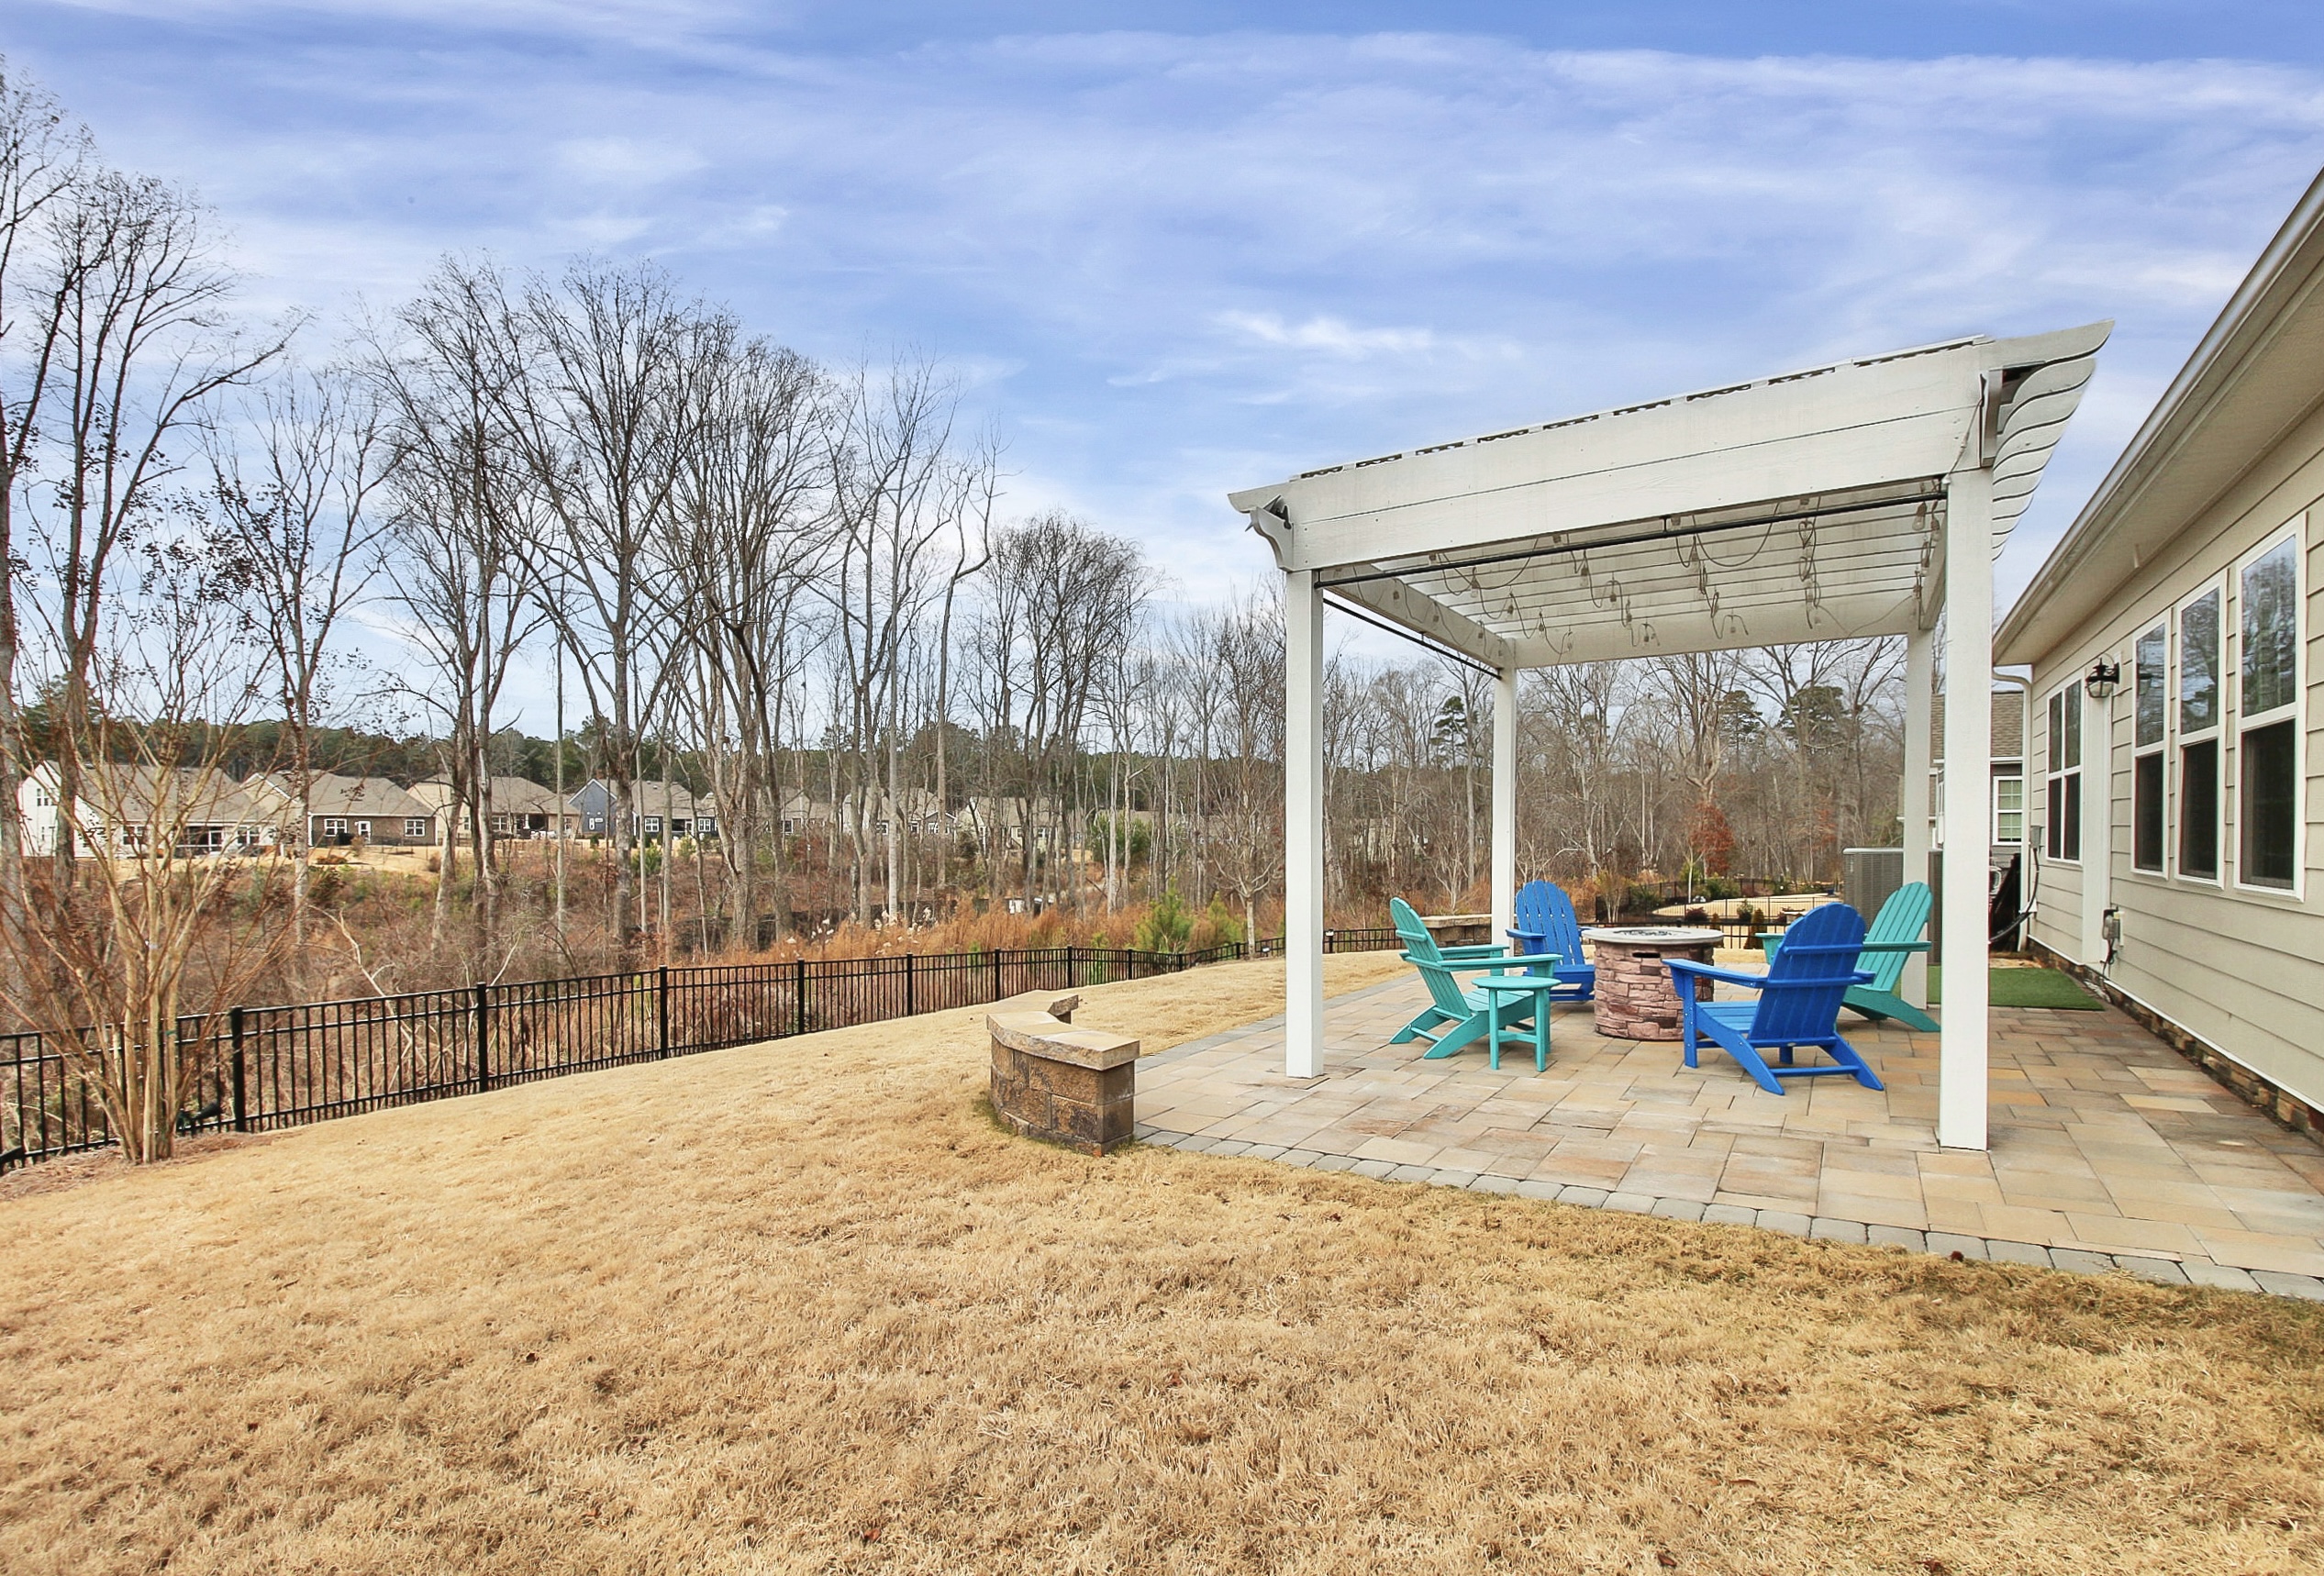 Imagery Home for sale - 325 Picasso Trail Mt Holly backyard